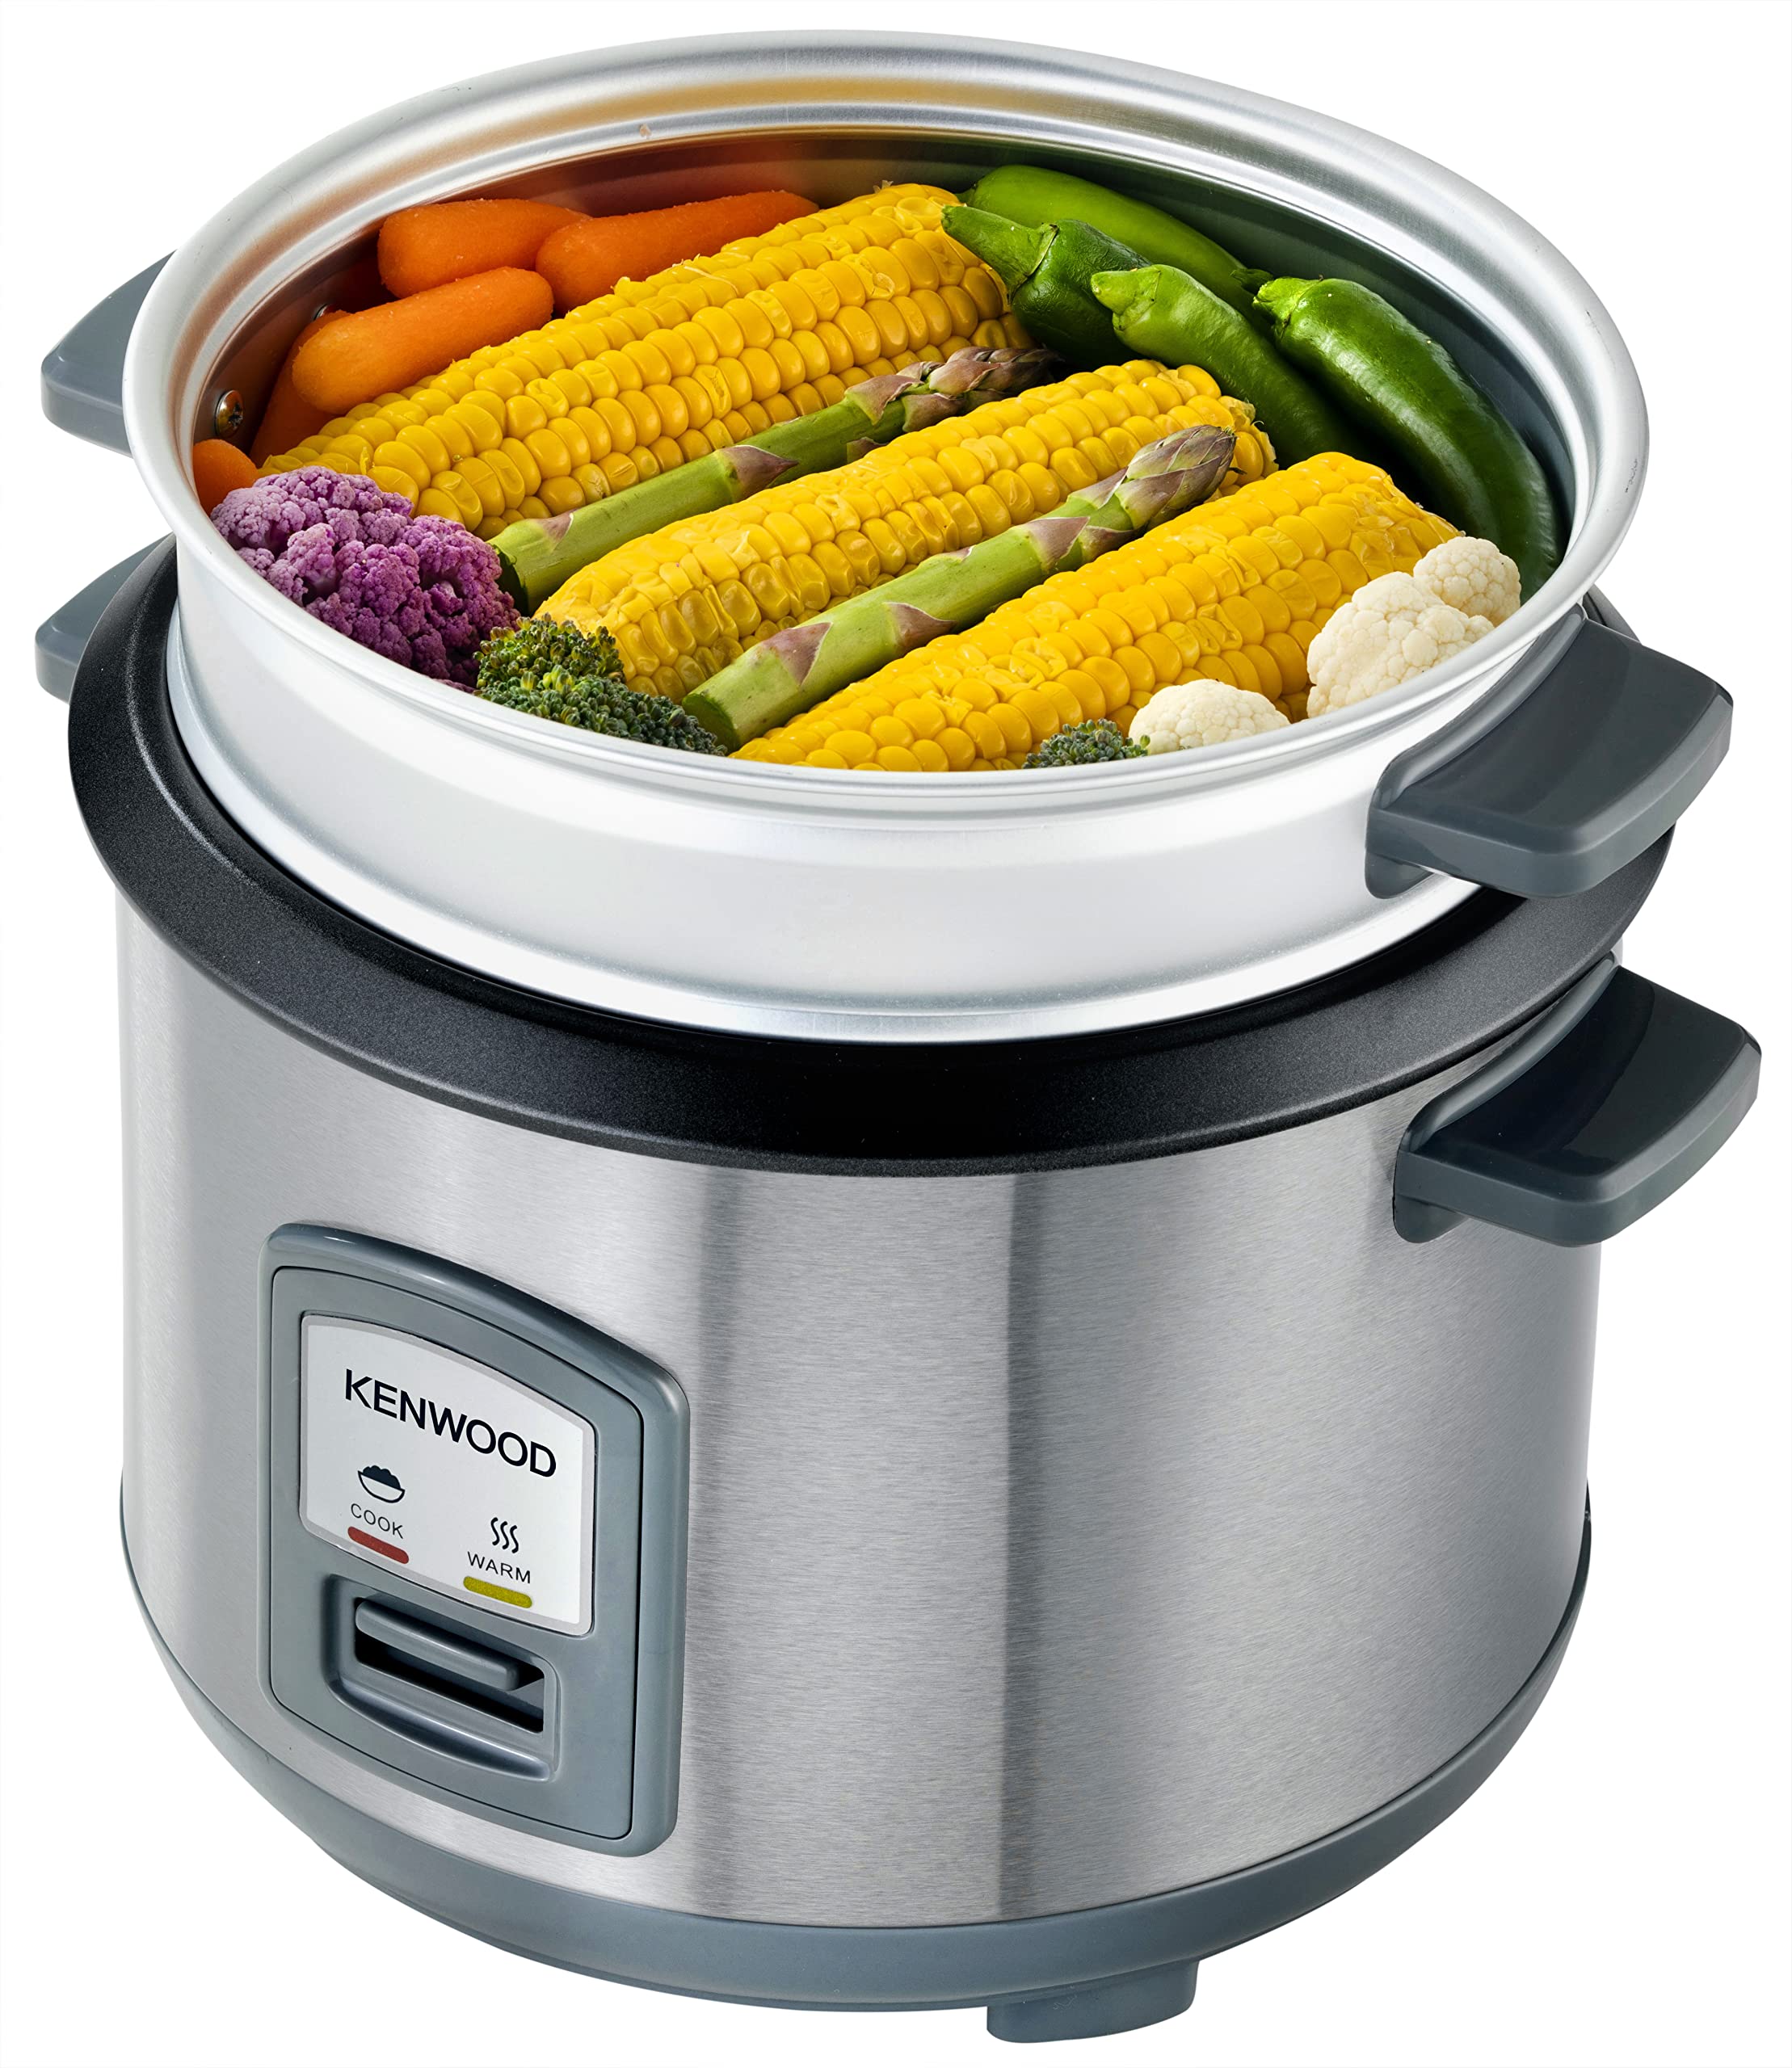 Kenwood Rice Cooker with Steamer, Large 2.8L